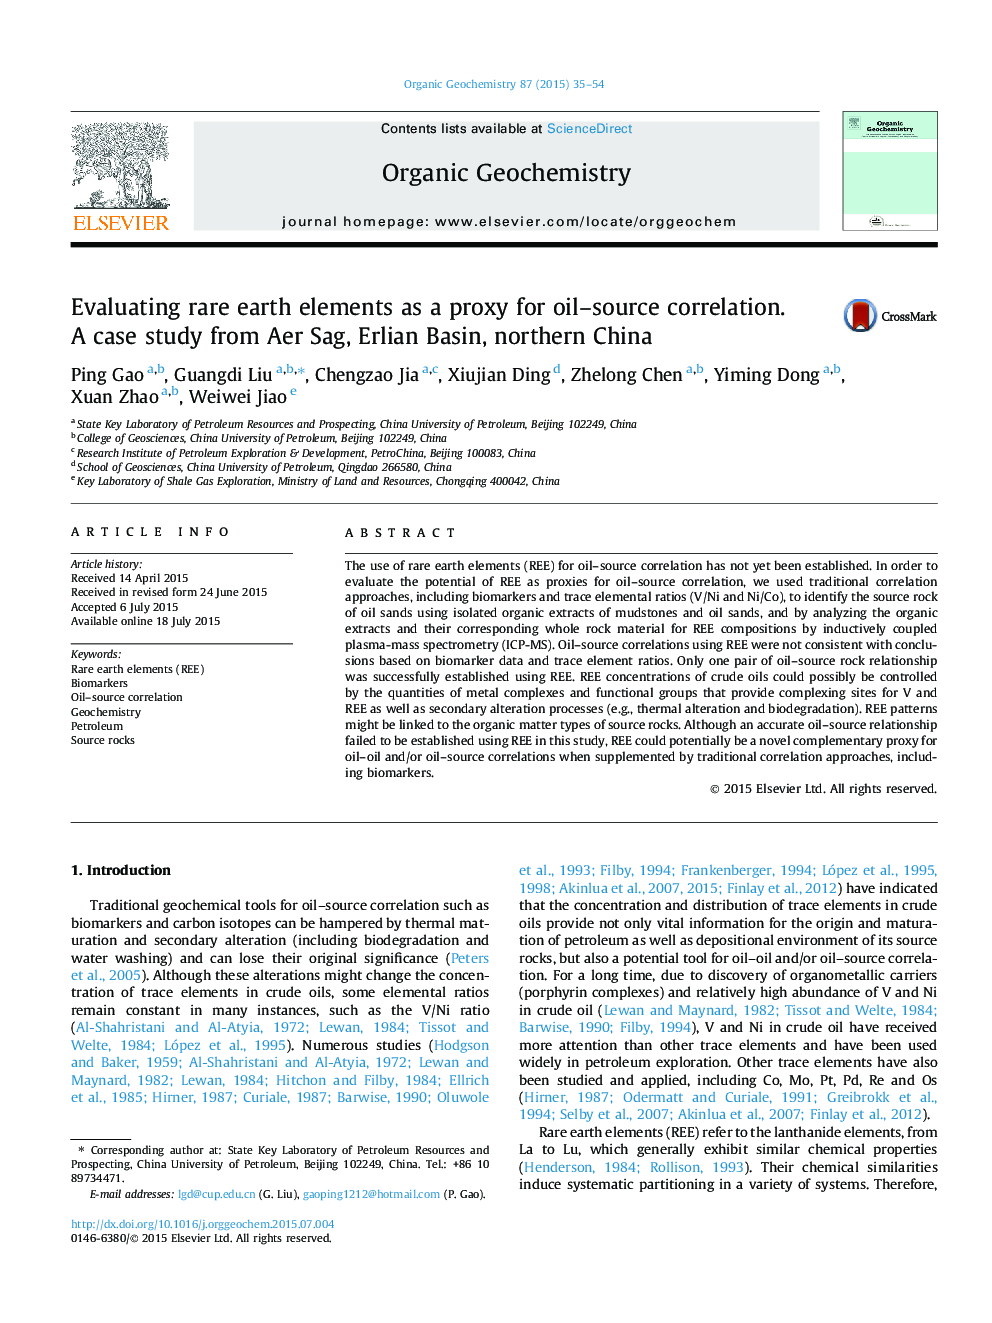 Evaluating rare earth elements as a proxy for oil-source correlation. A case study from Aer Sag, Erlian Basin, northern China